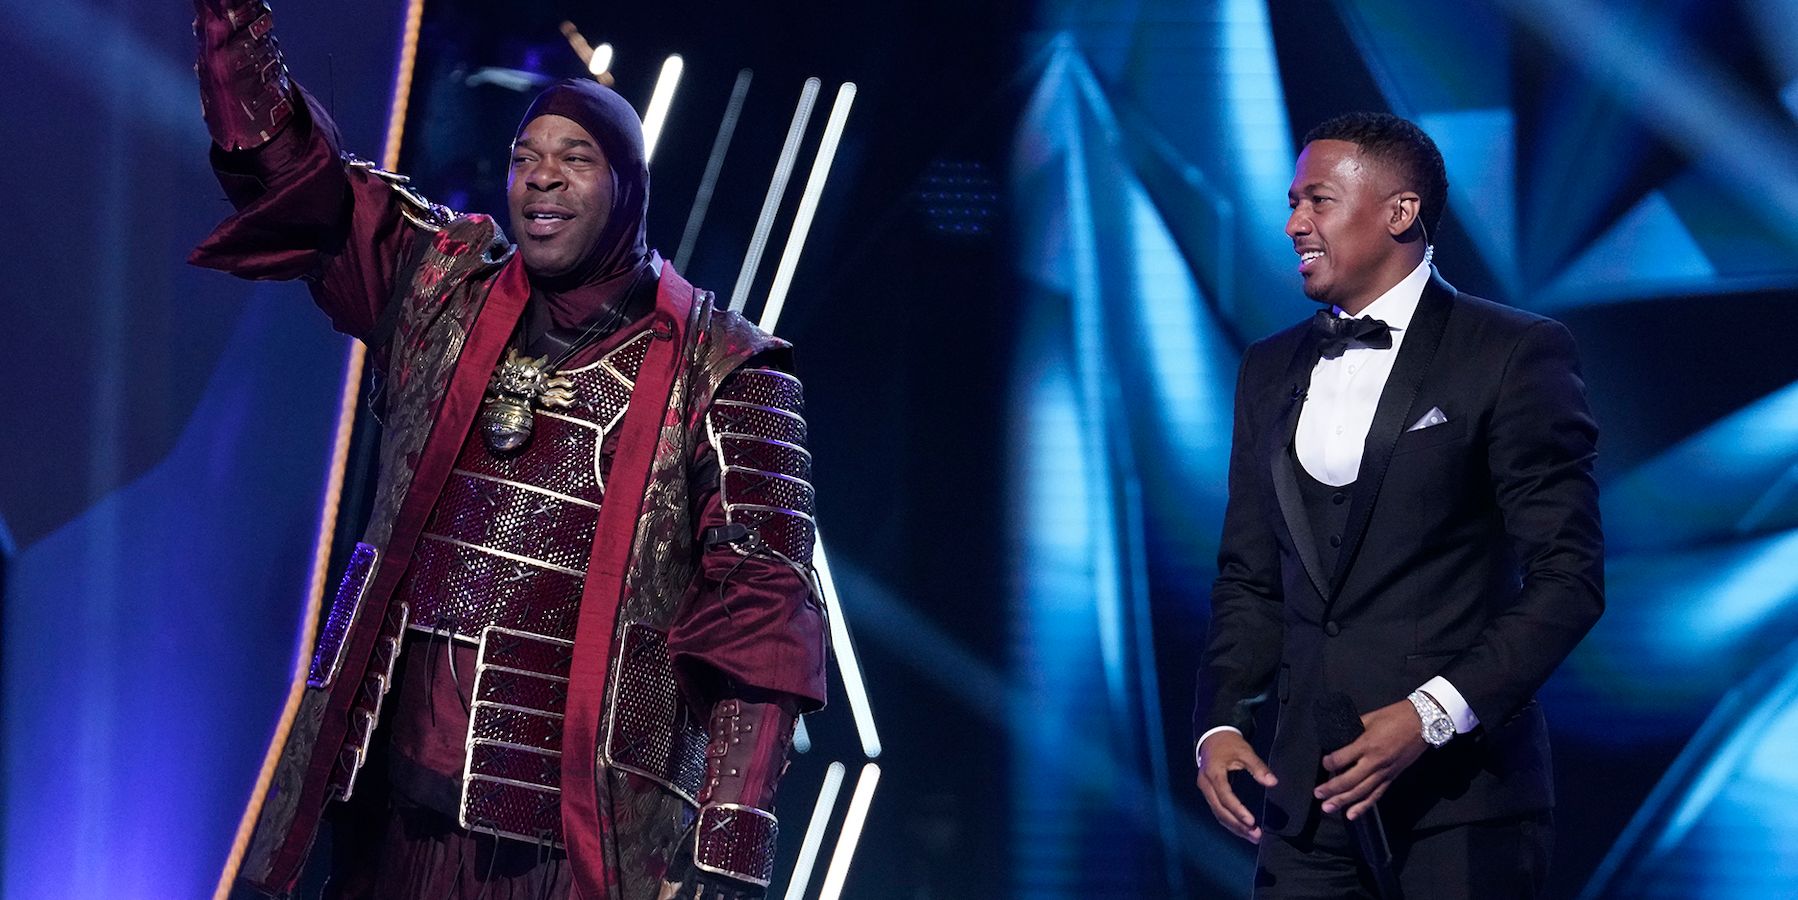 The Masked Singer: Dragon Revealed To Be Rapper Busta Rhymes